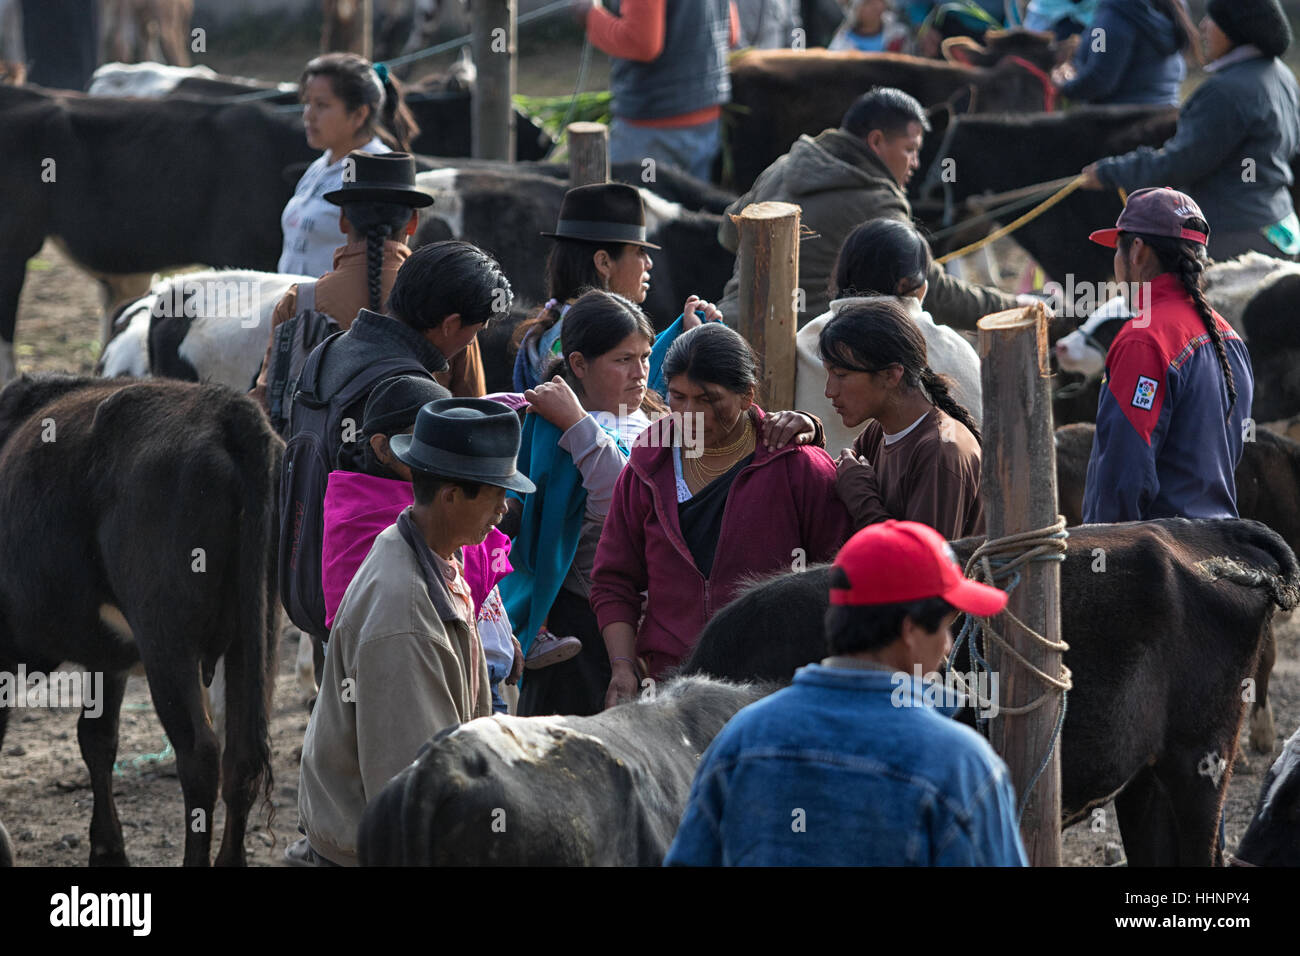 August 6, 2016 Otavalo, Ecuador: Men and women trading or selling their livestock at the animal market Stock Photo